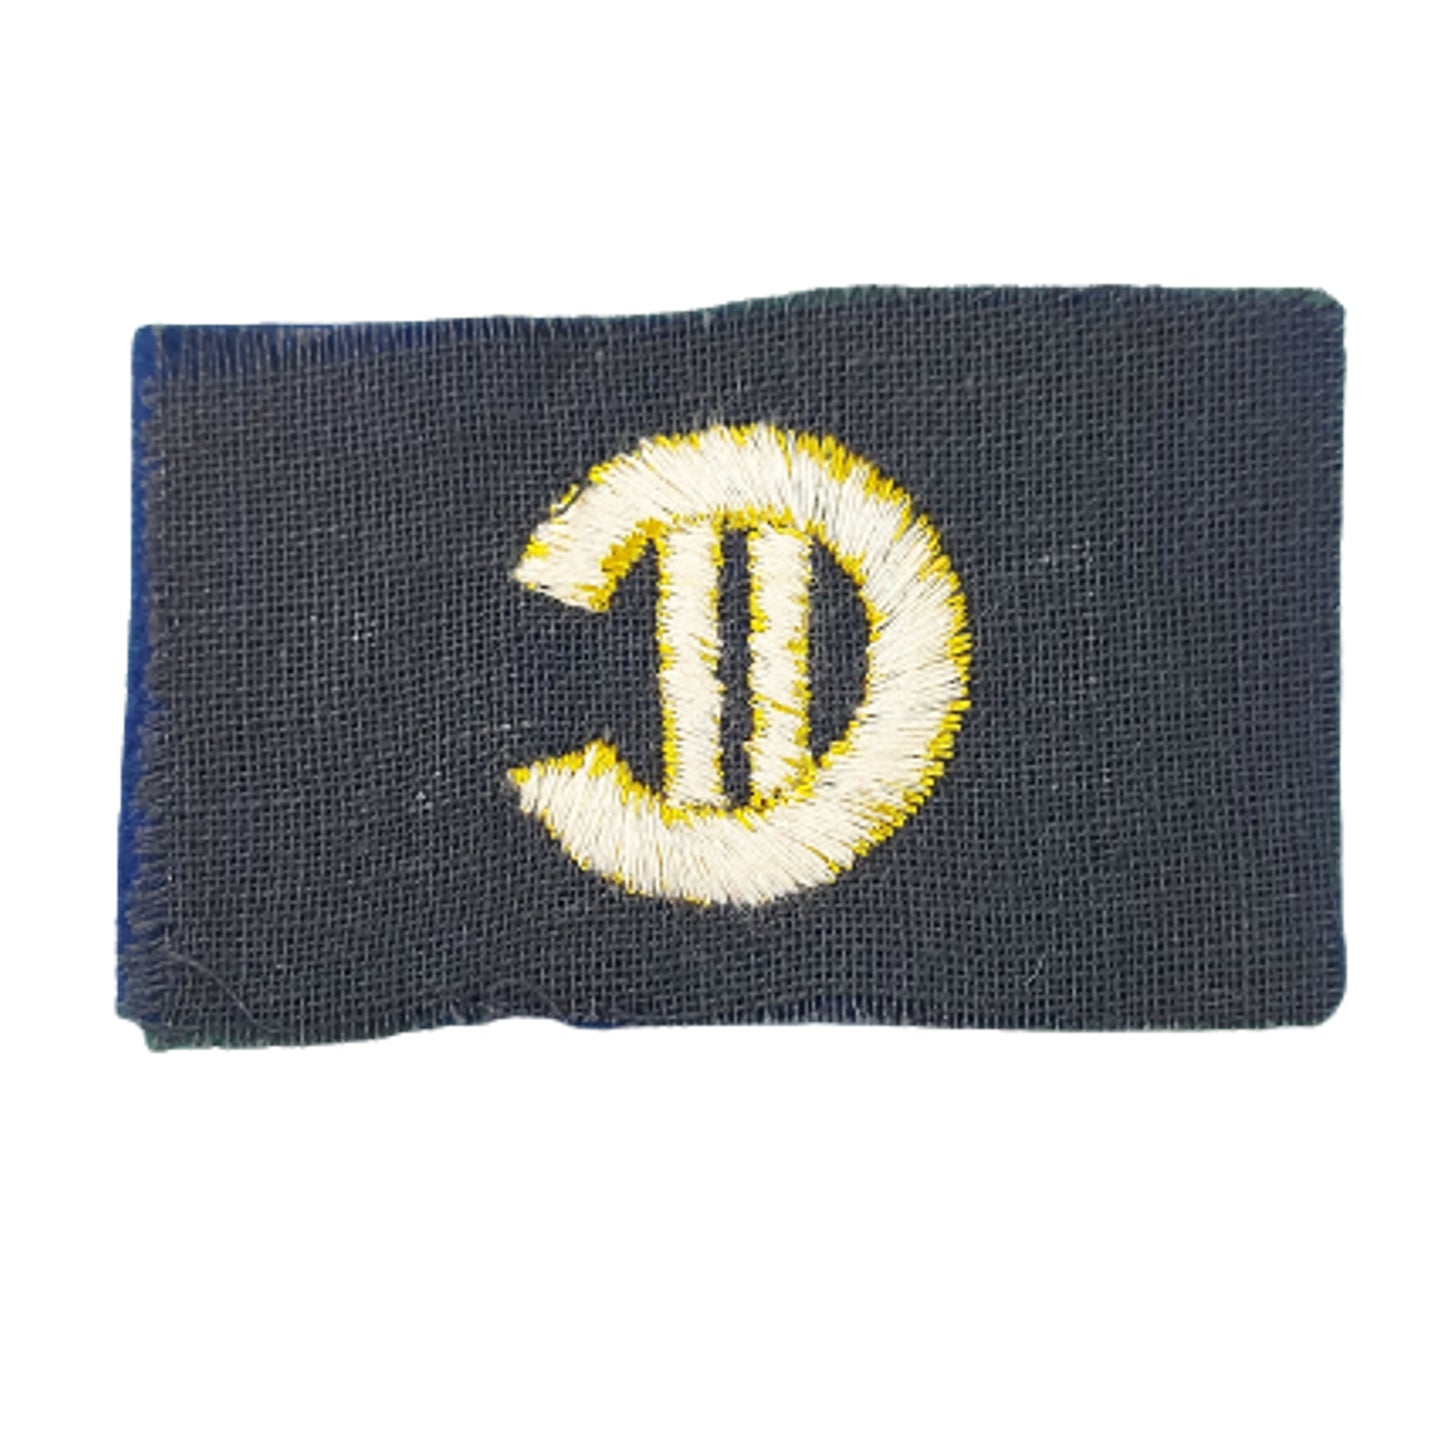 WW2 Canadian Army 2nd Division Officers Uniform Insignia